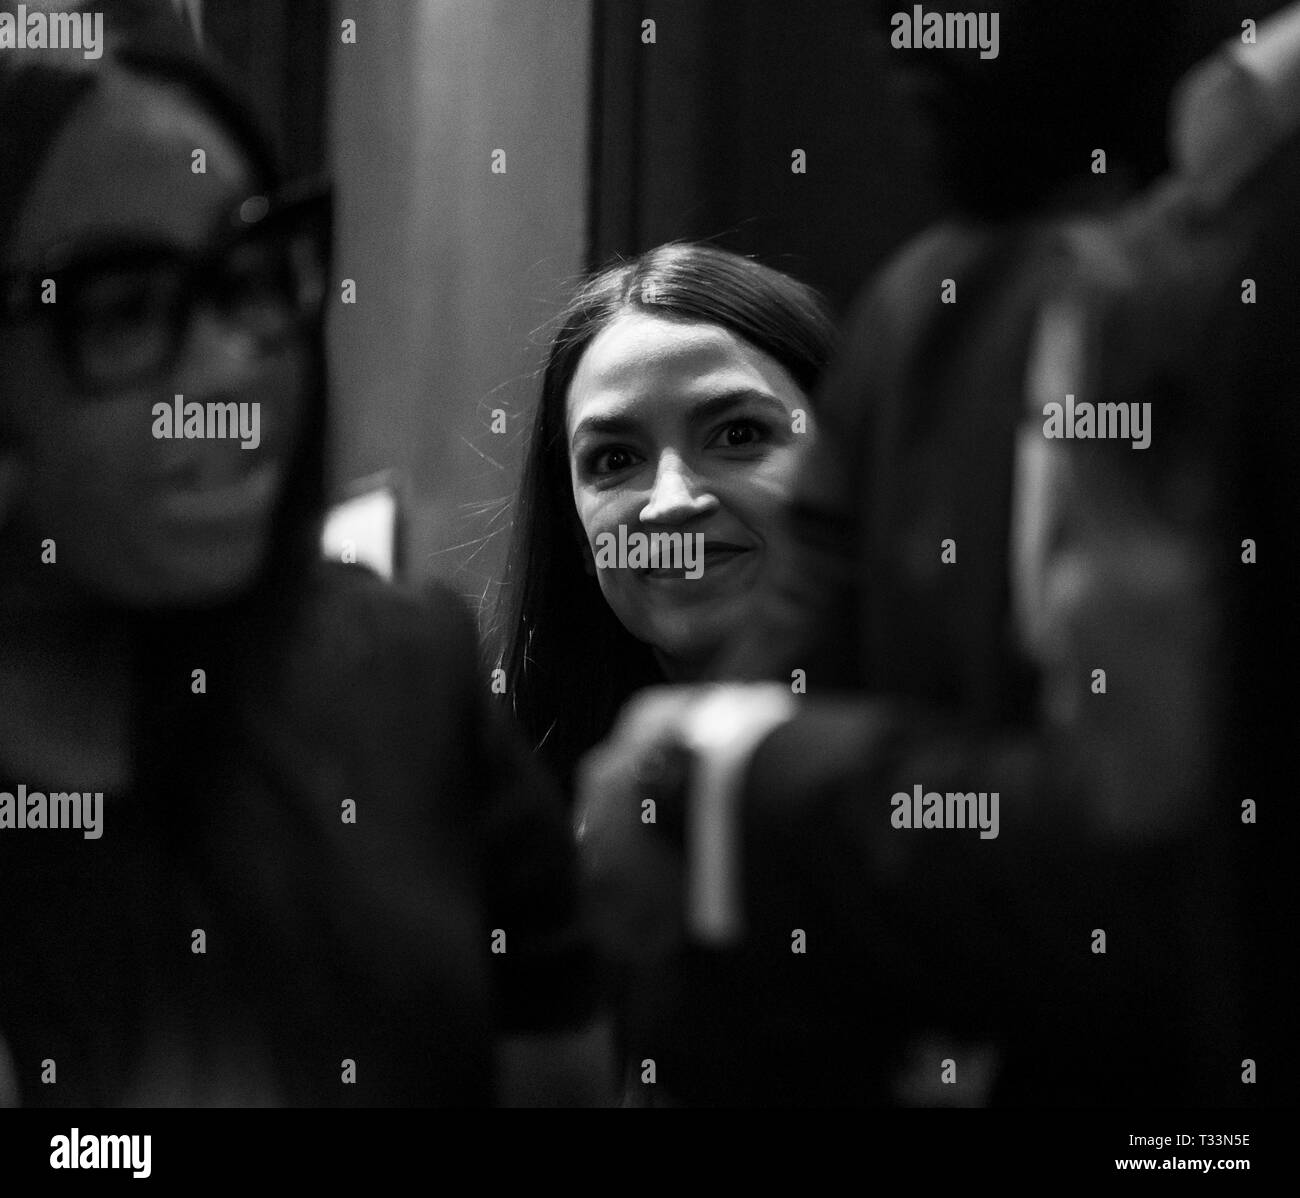 New York, United States. 05th Apr, 2019. US Congresswoman Alexandria Ocasio-Cortez attends National Action Network 2019 convention at Sheraton Times Square. Credit: Lev Radin/Pacific Press/Alamy Live News Stock Photo